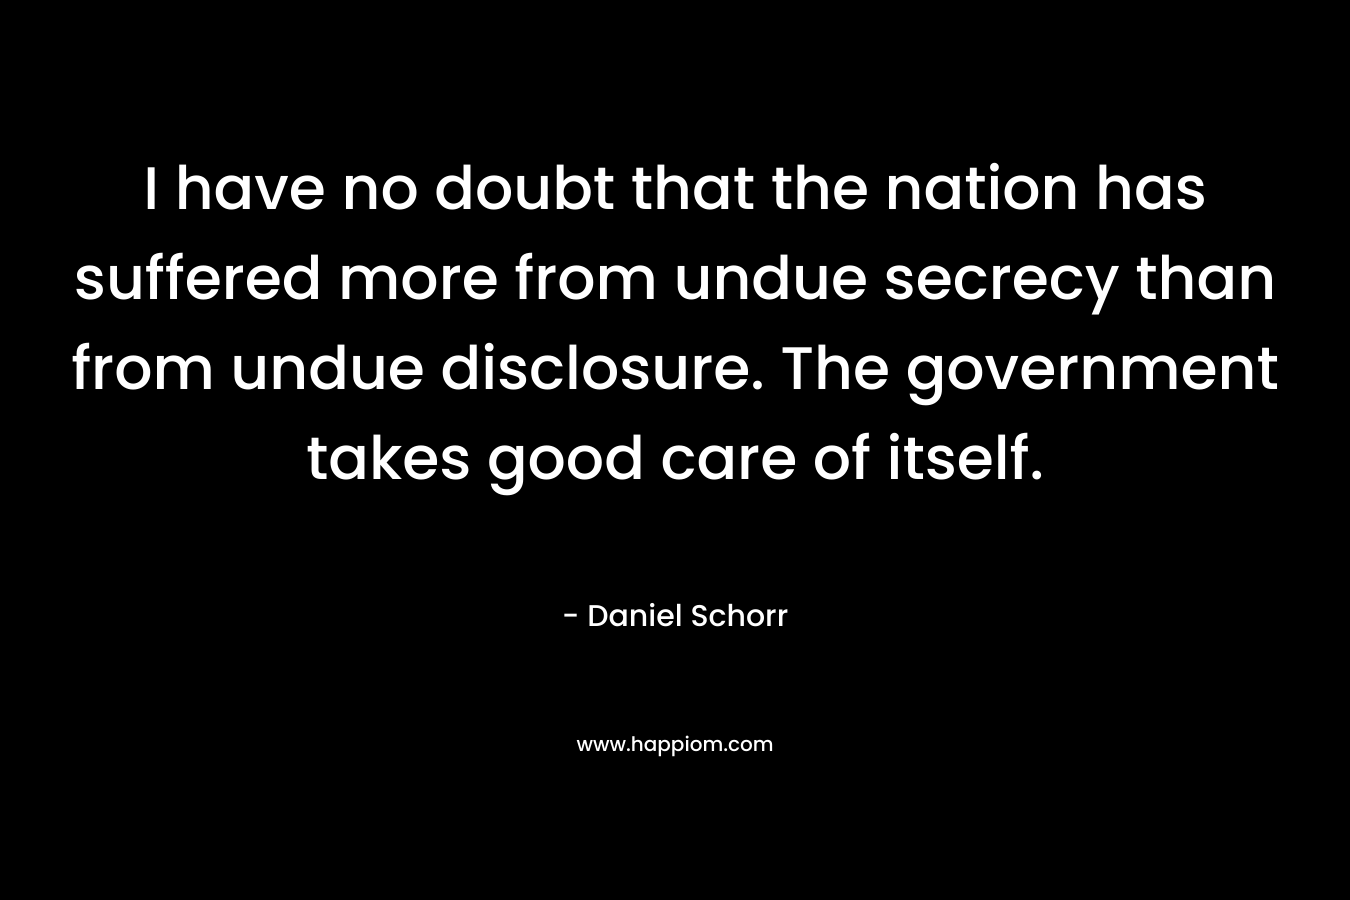 I have no doubt that the nation has suffered more from undue secrecy than from undue disclosure. The government takes good care of itself.